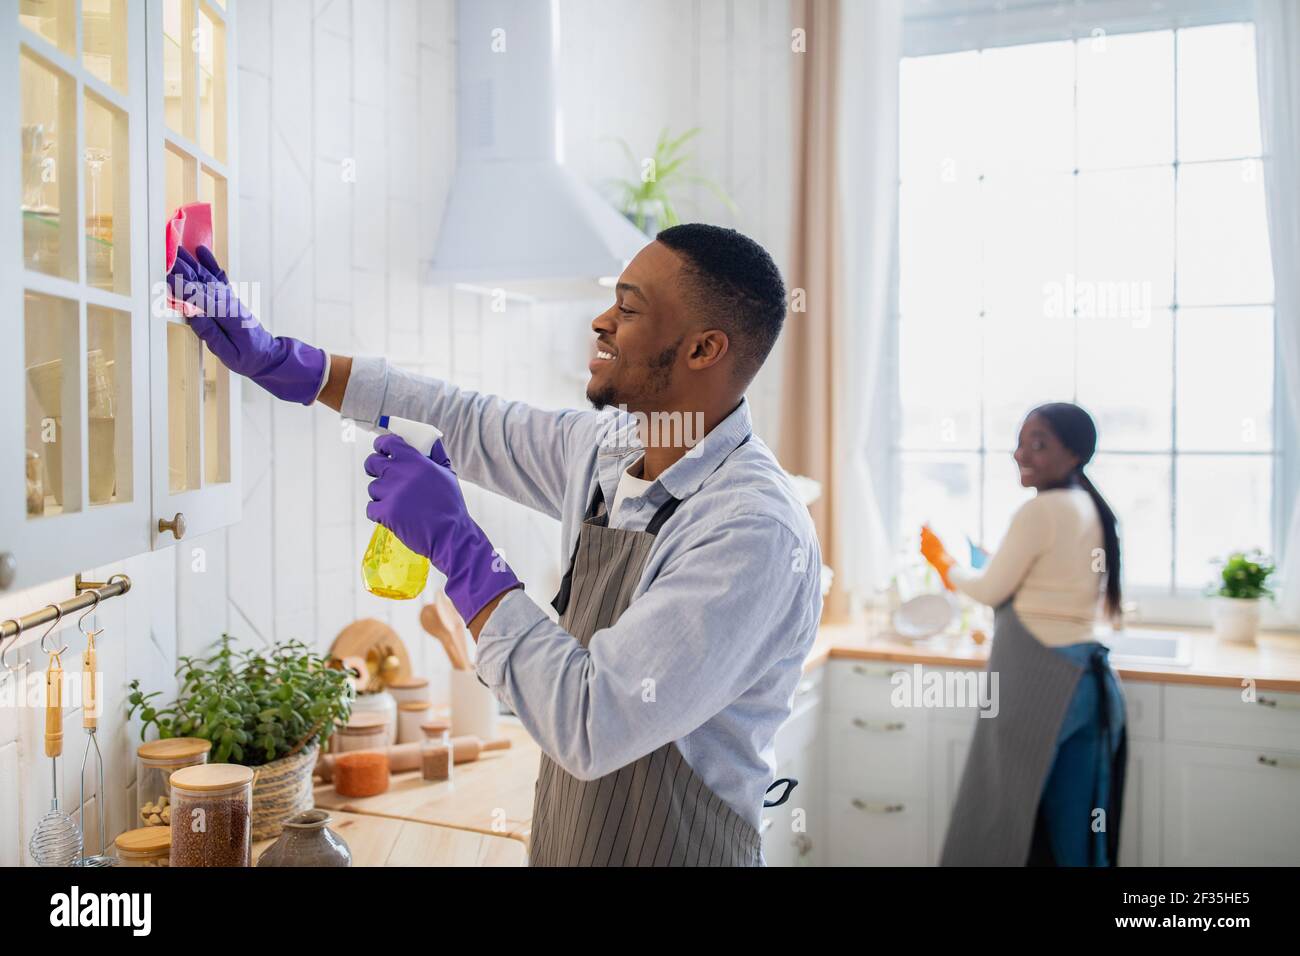 man cleaning kitchen counter stock photos - OFFSET